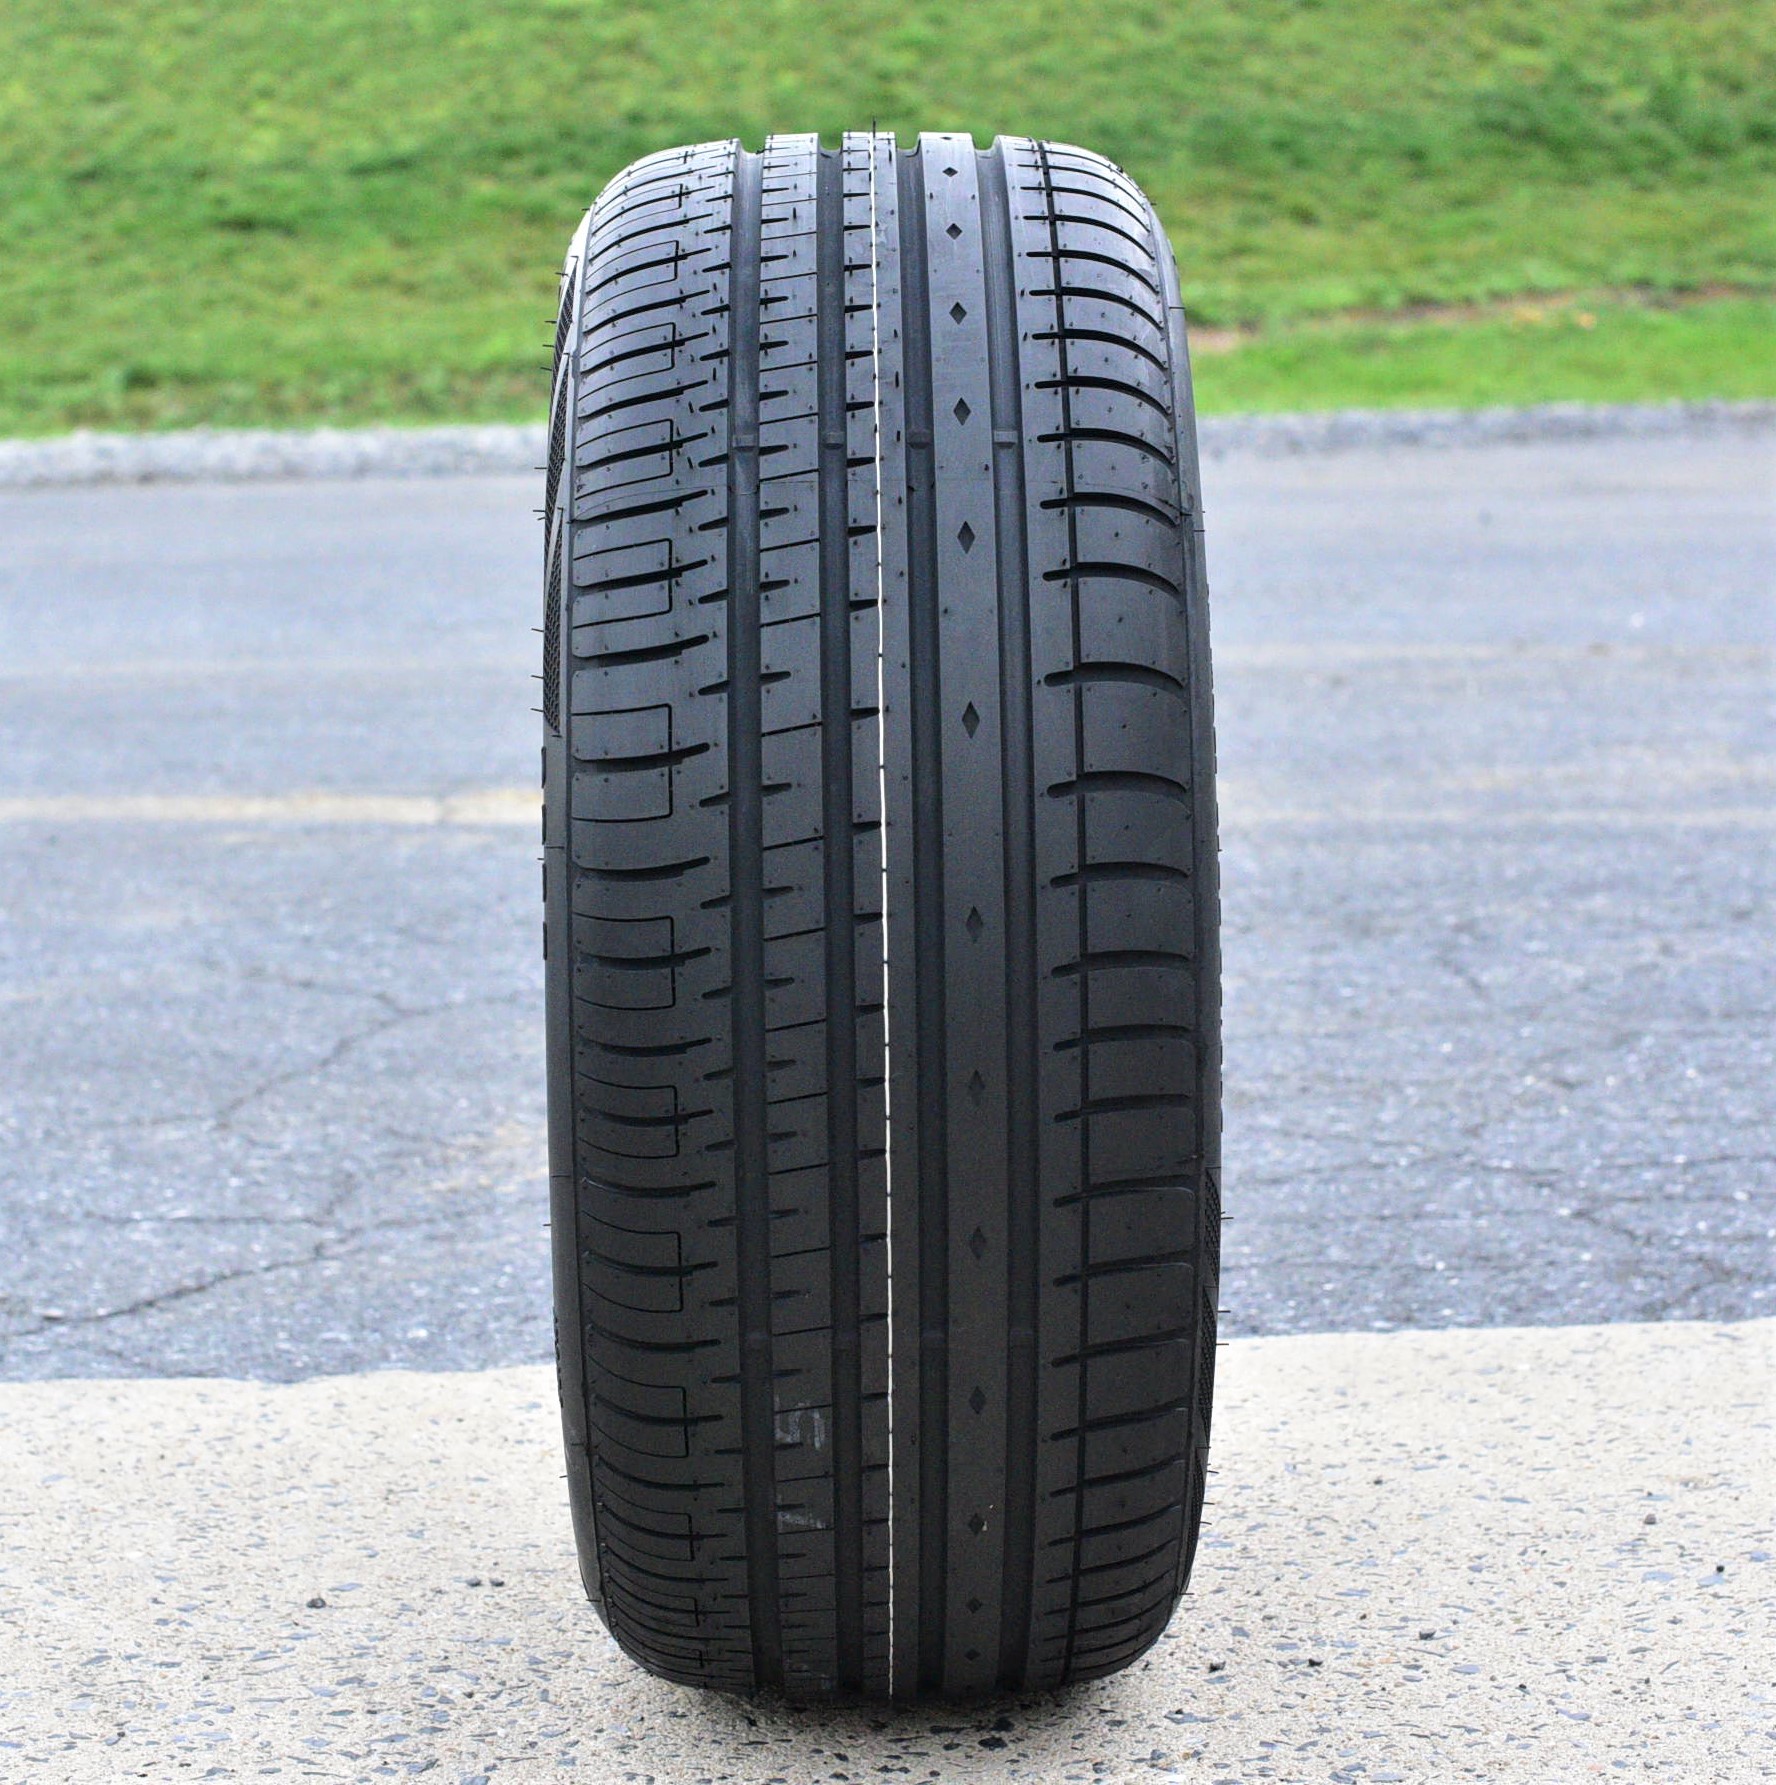 Accelera Phi-R 255/35R20 ZR 97Y XL A/S High Performance Tire - image 5 of 14